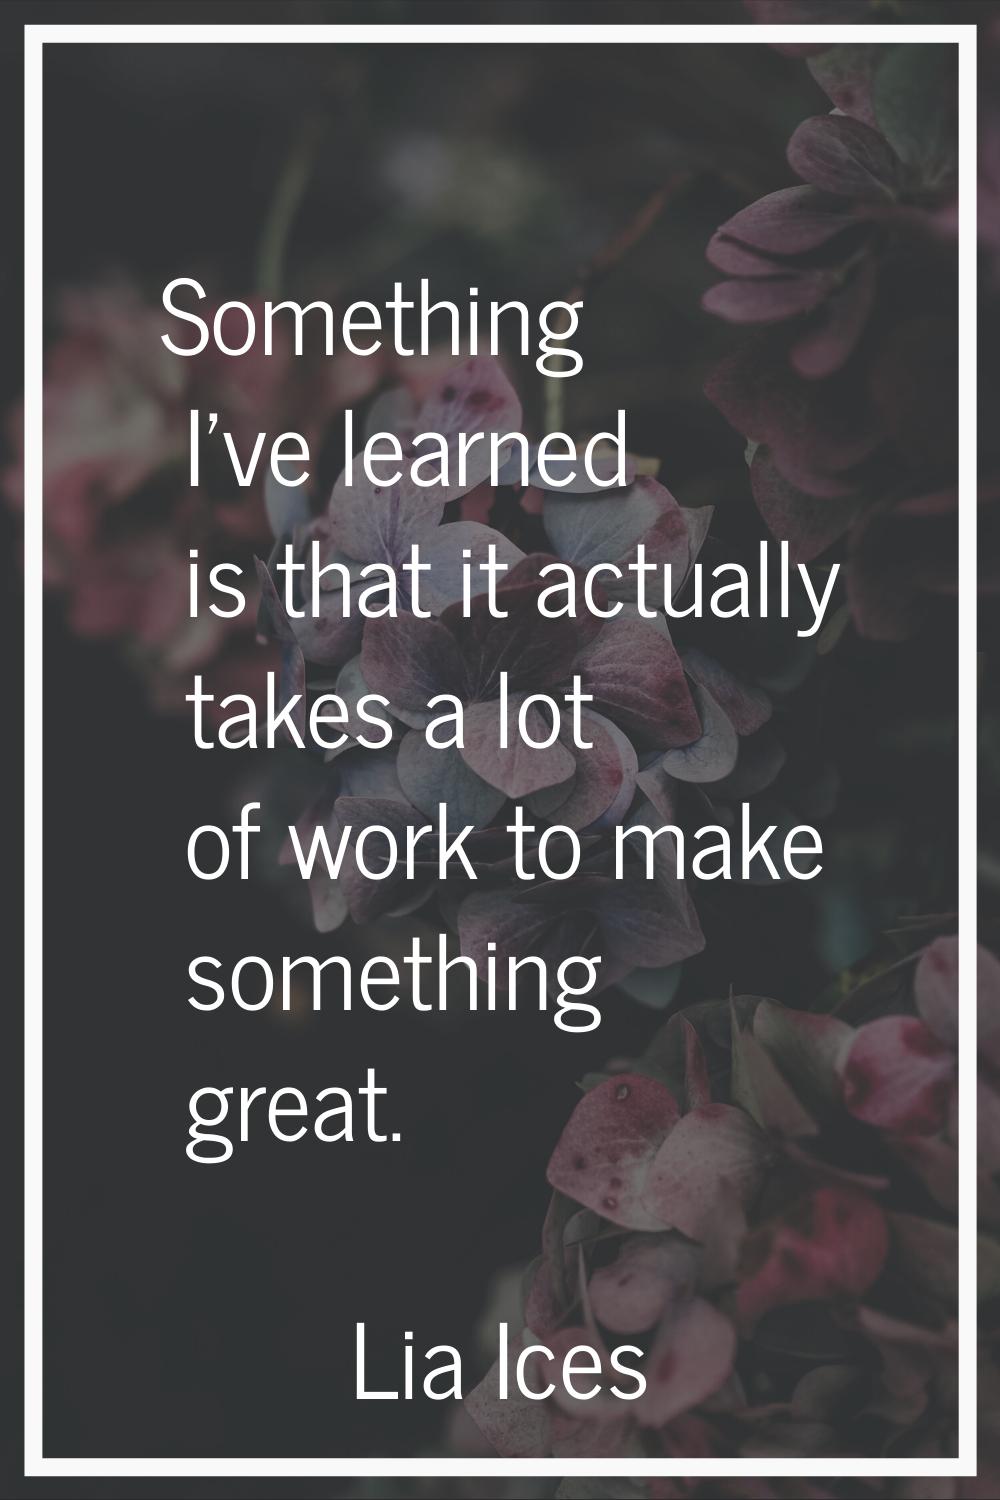 Something I've learned is that it actually takes a lot of work to make something great.